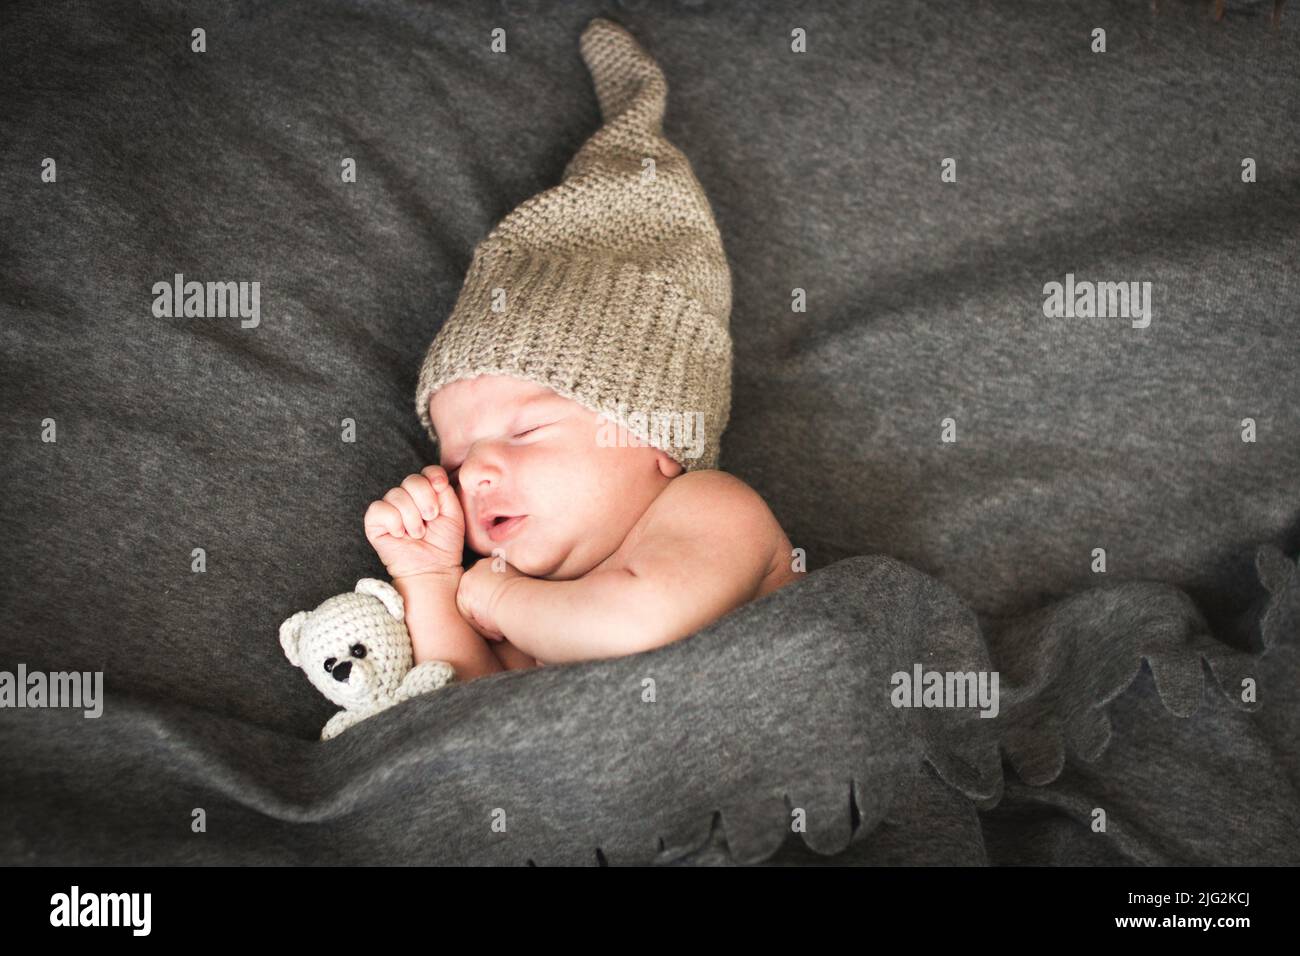 newborn baby sleeping with a toy next to the knitted teddy bear. Stock Photo